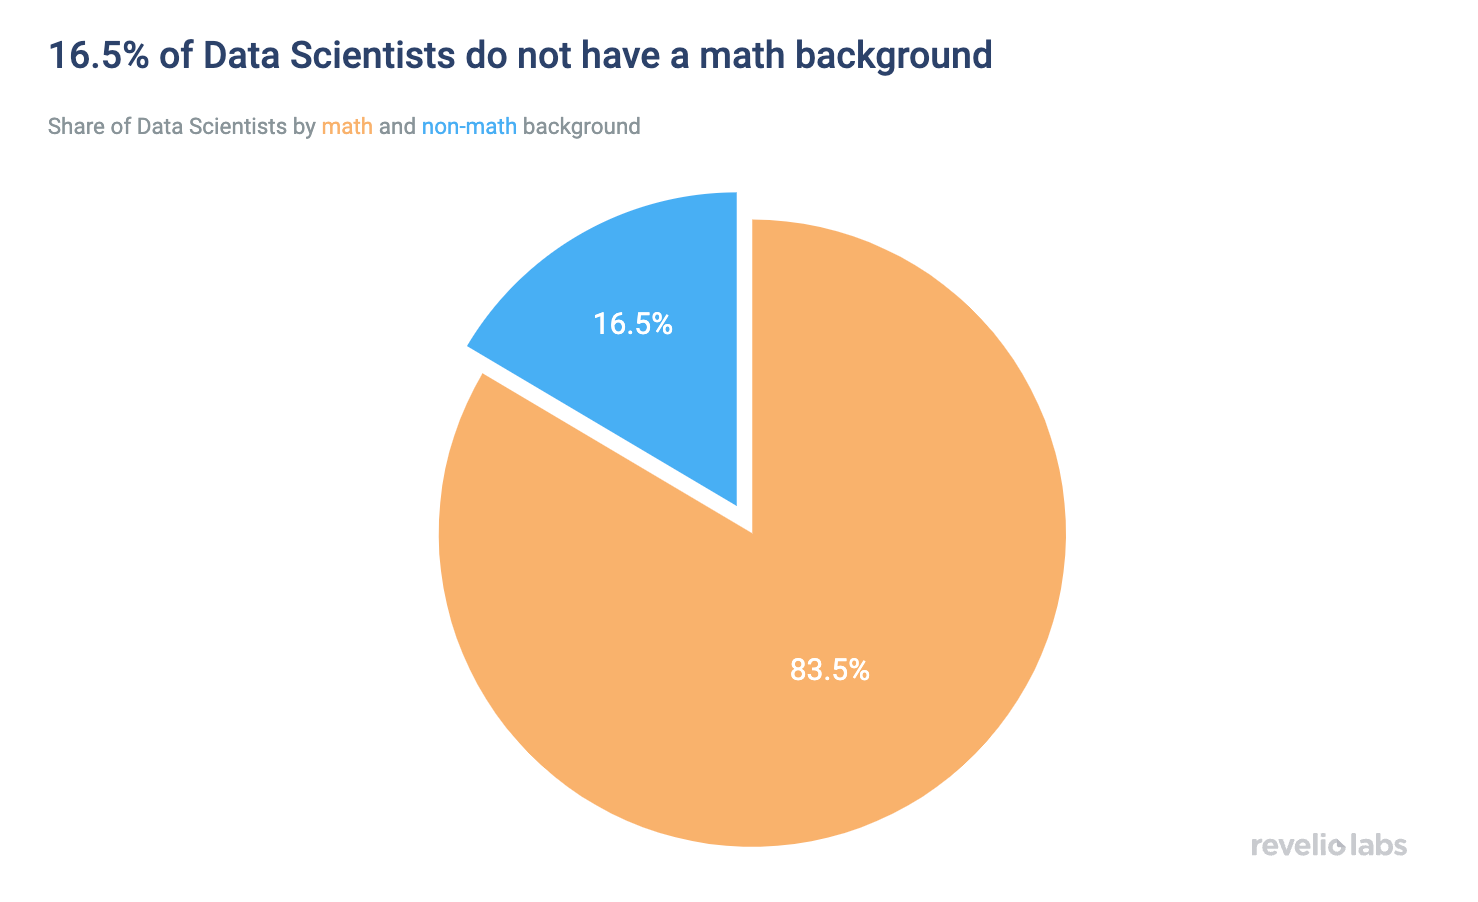 16.5% of Data Scientists do not have a math background